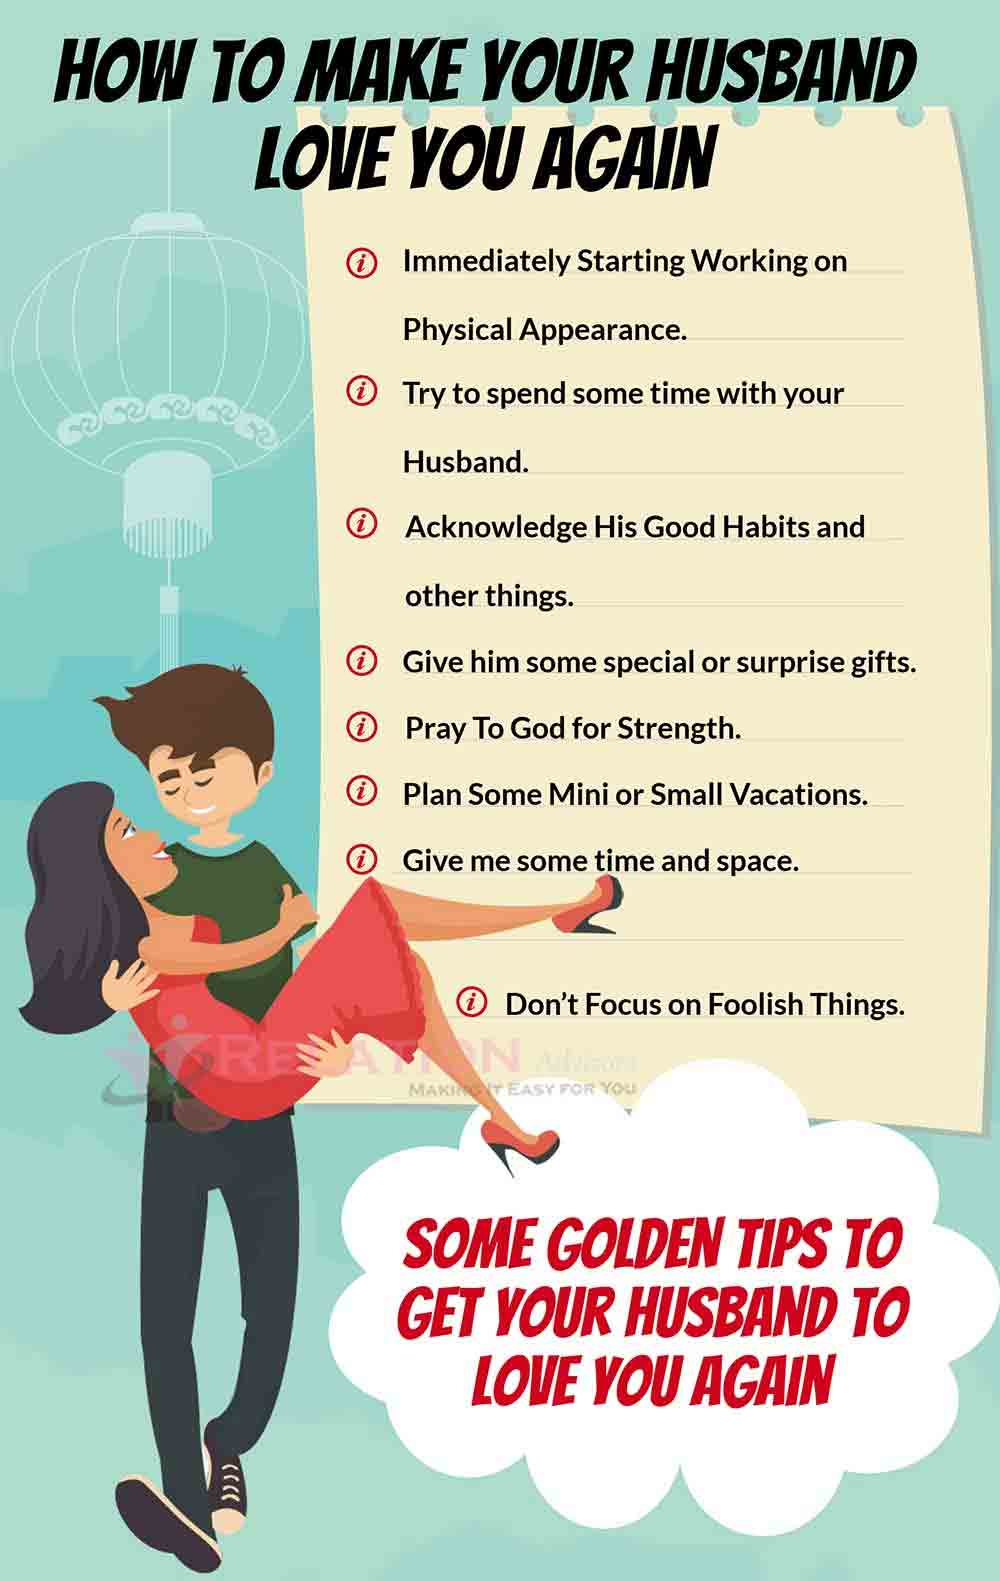 Golden Tips to make your husband love you again